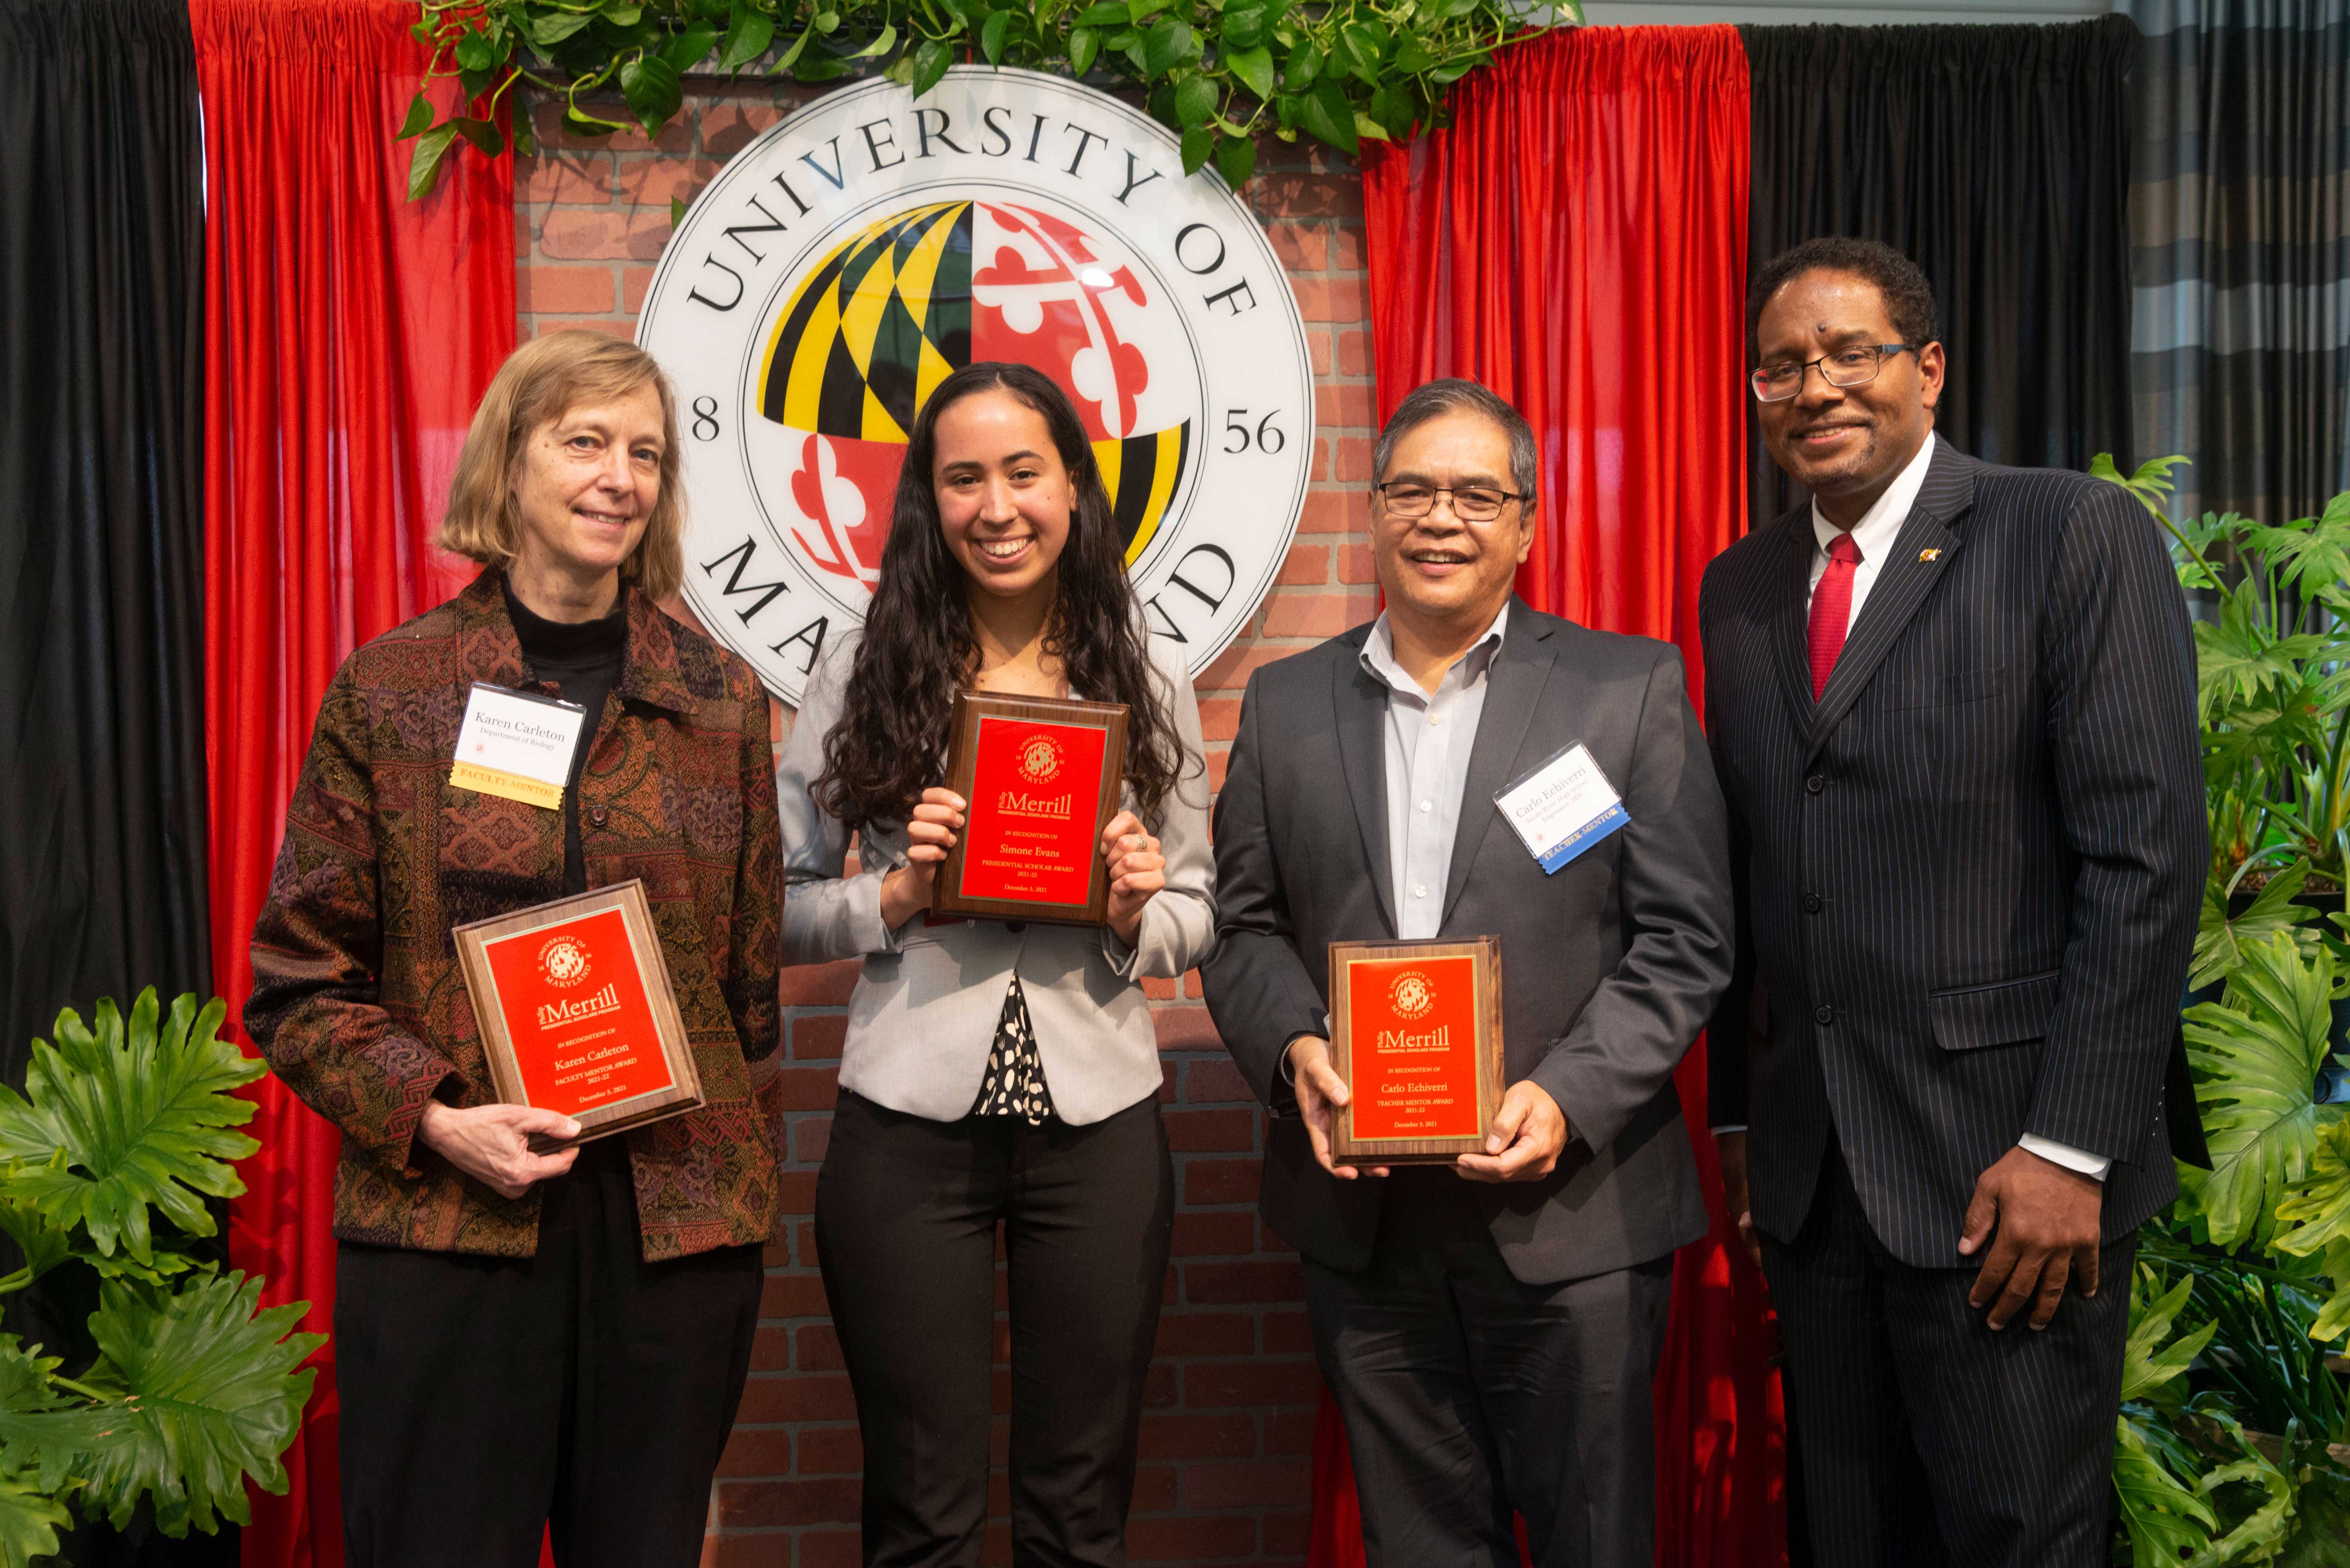 Merrill Scholar Simone Evans with mentors and President Pines